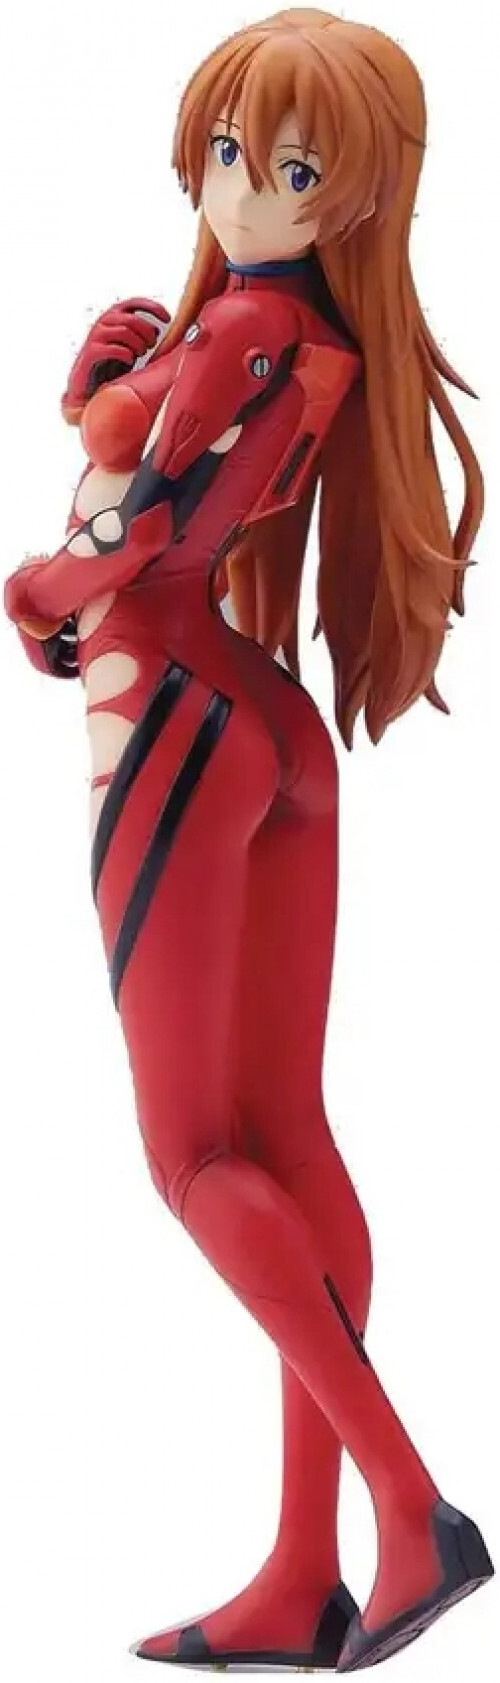 GoodSmile Company Evangelion: 3.0+1.0 Thrice Upon a Time Figure - Asuka Langley On the beach Version